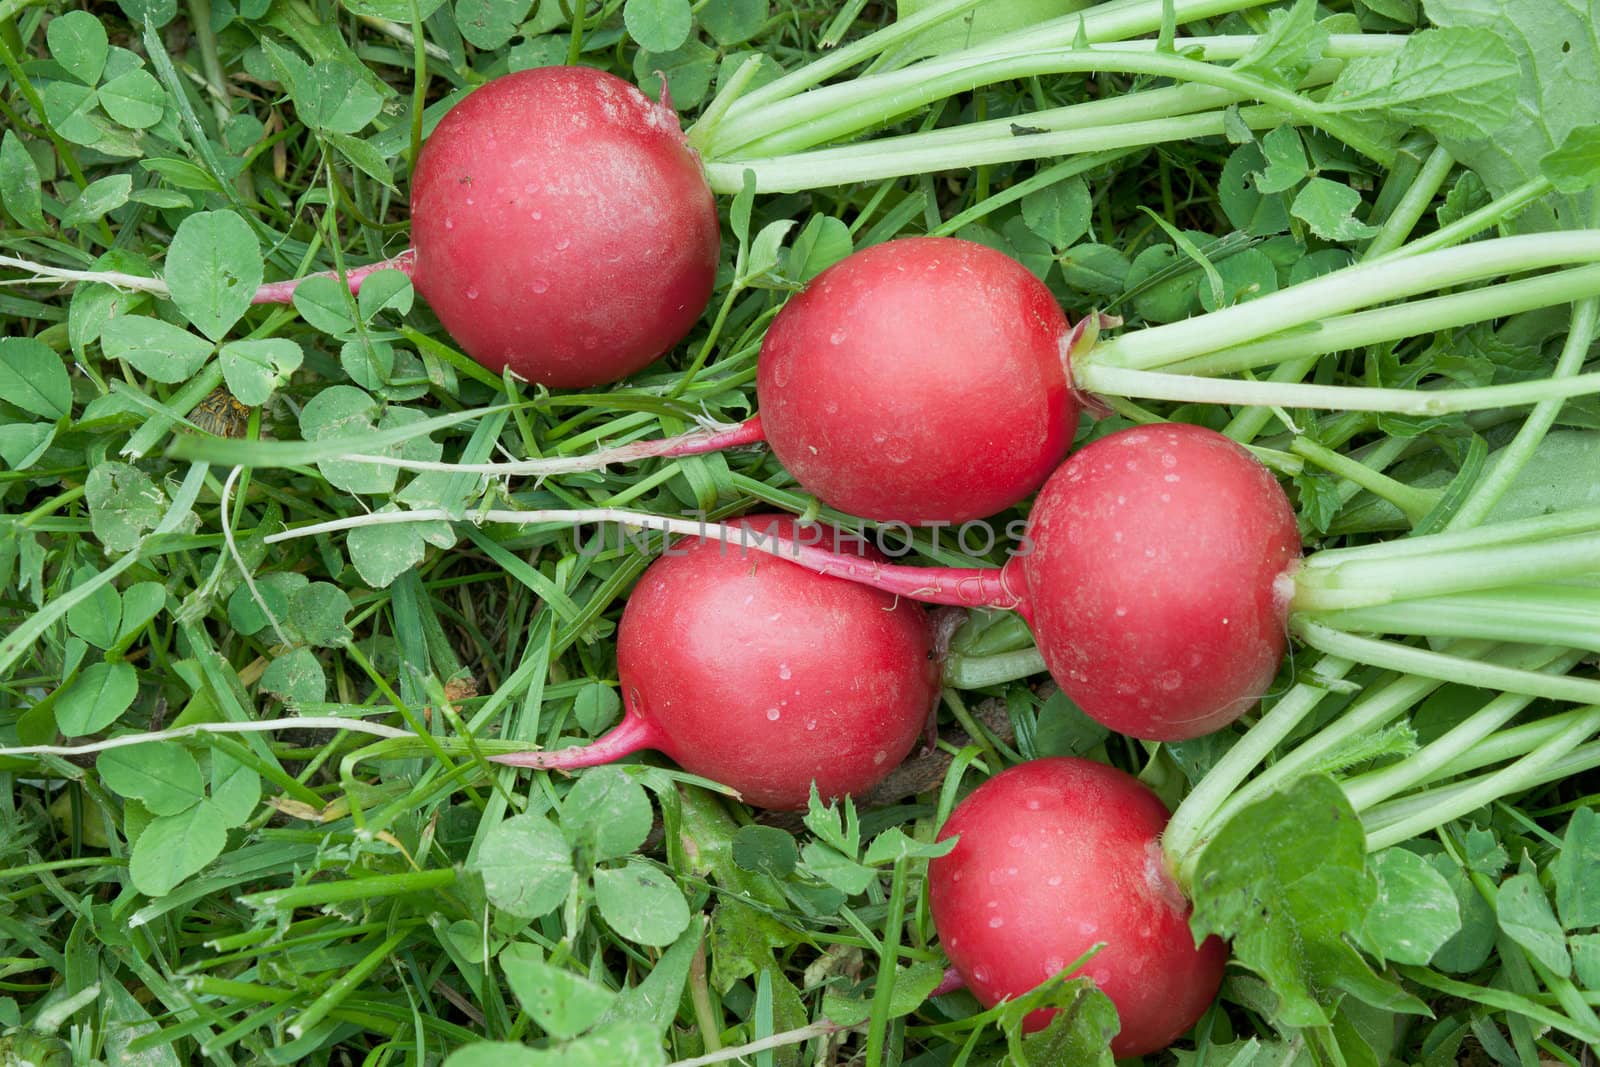 Five mouth-watering red radishes on the grass